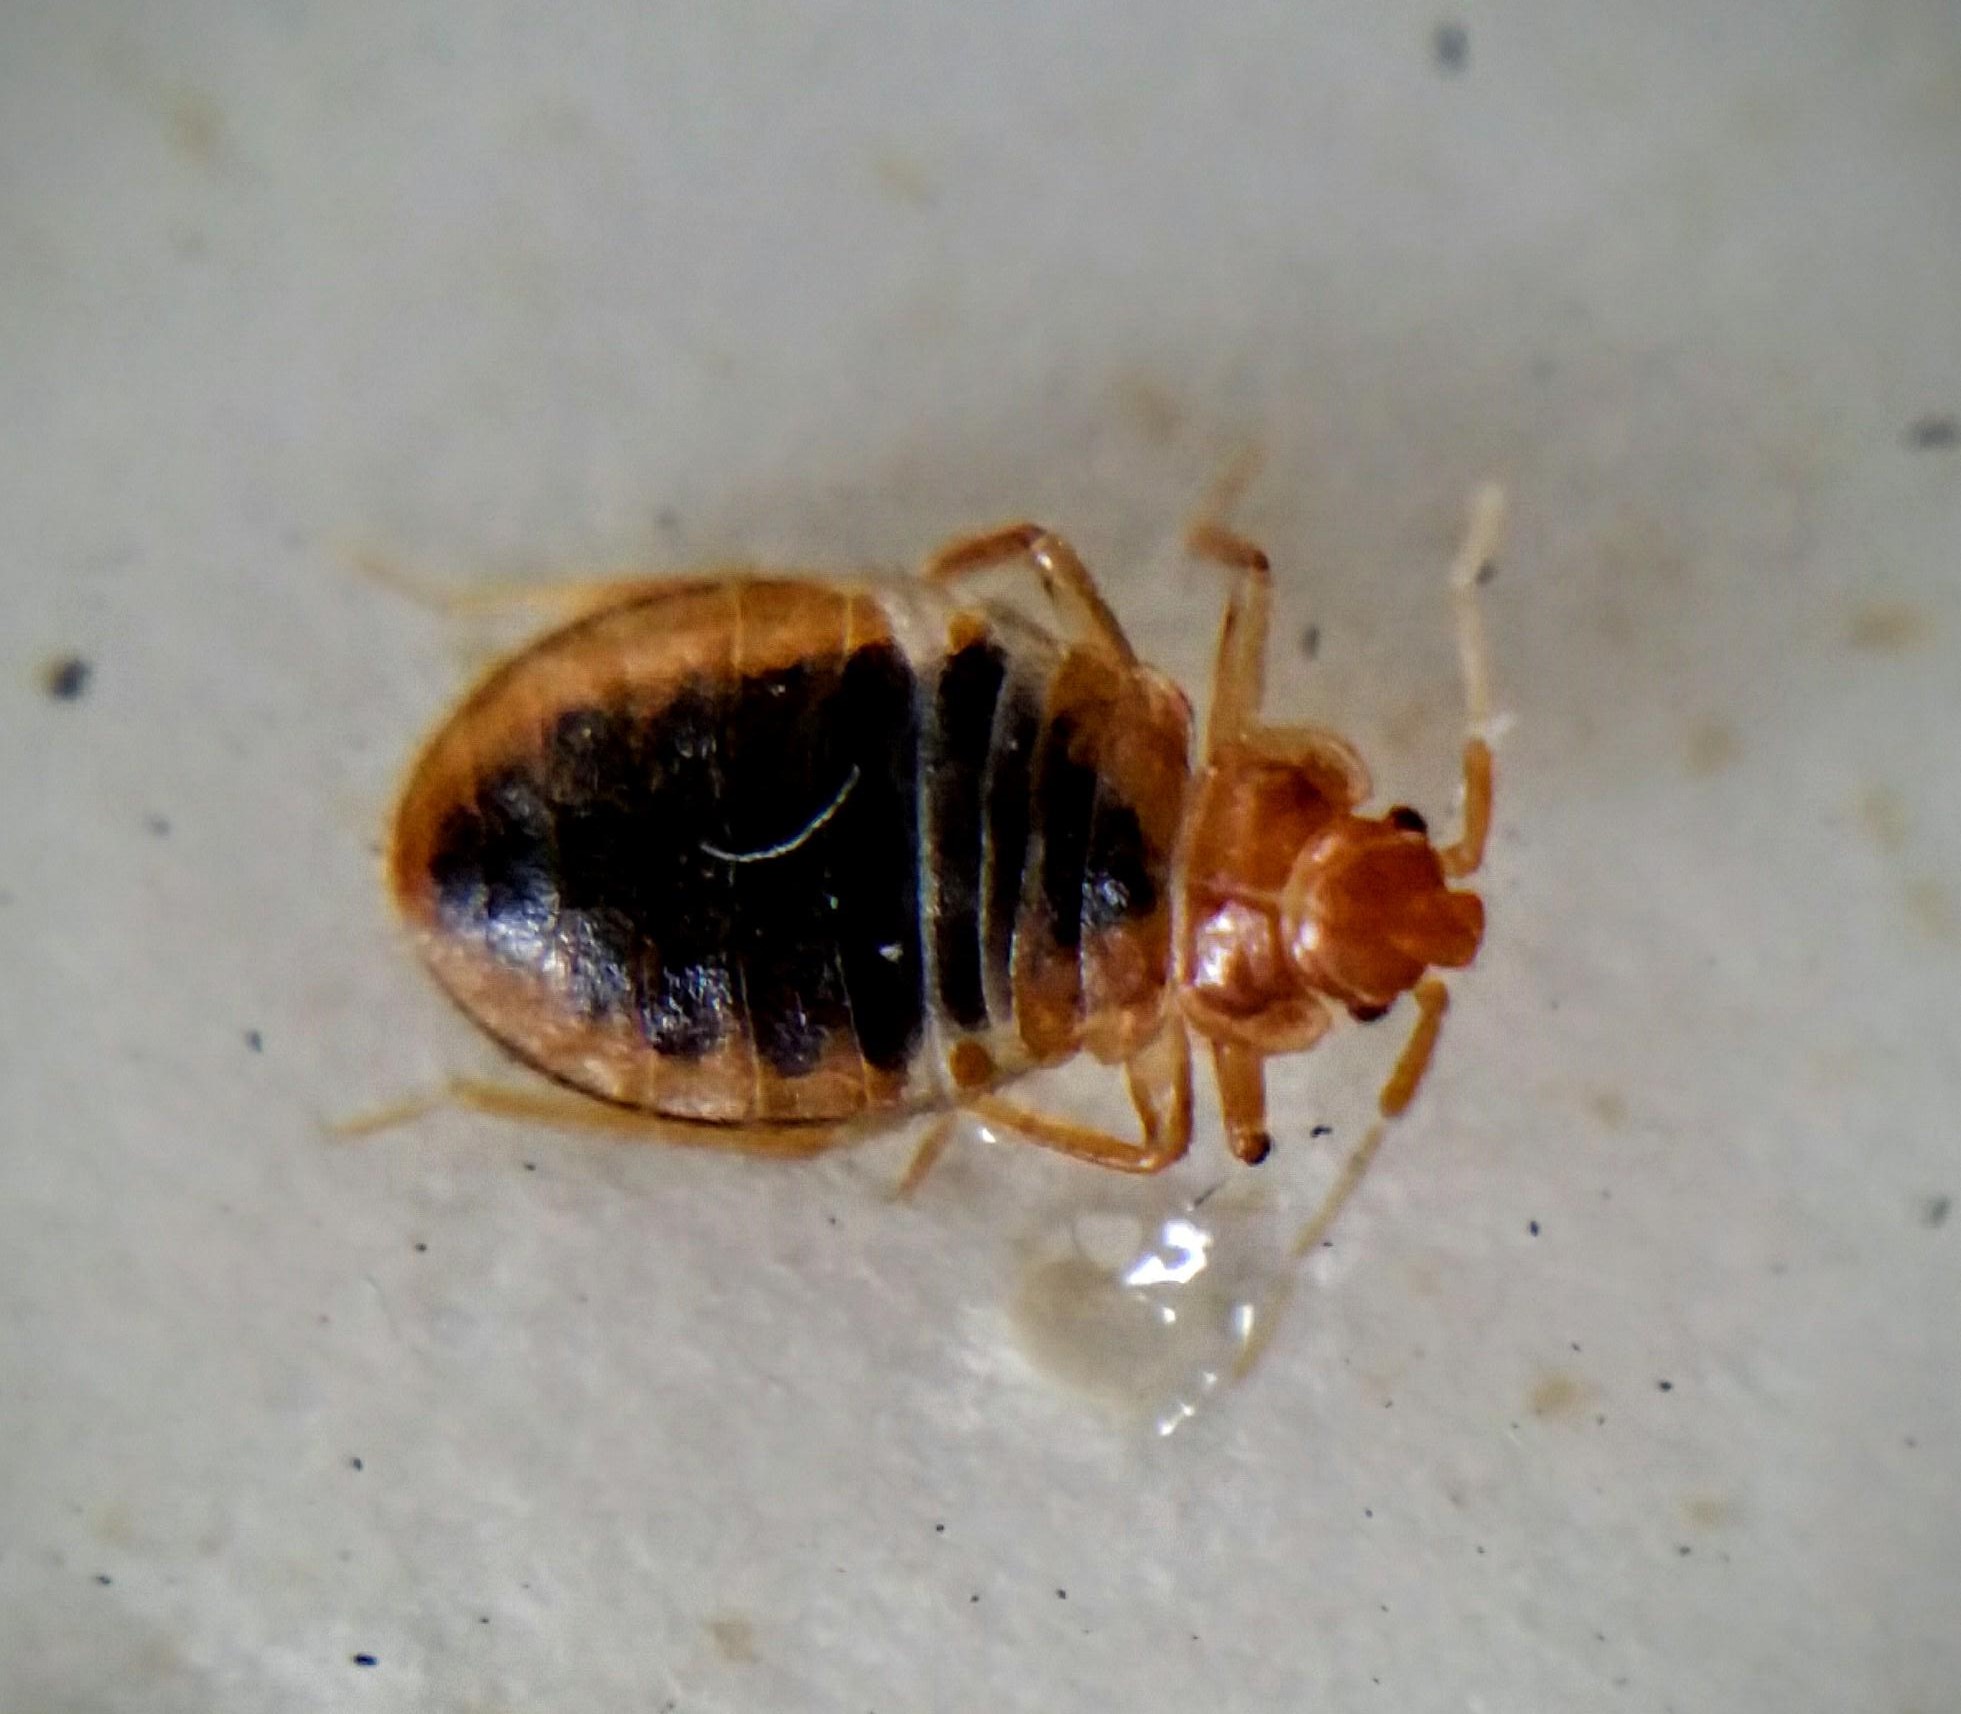 Autopsy finds woman died from complications from a bed bug infestation